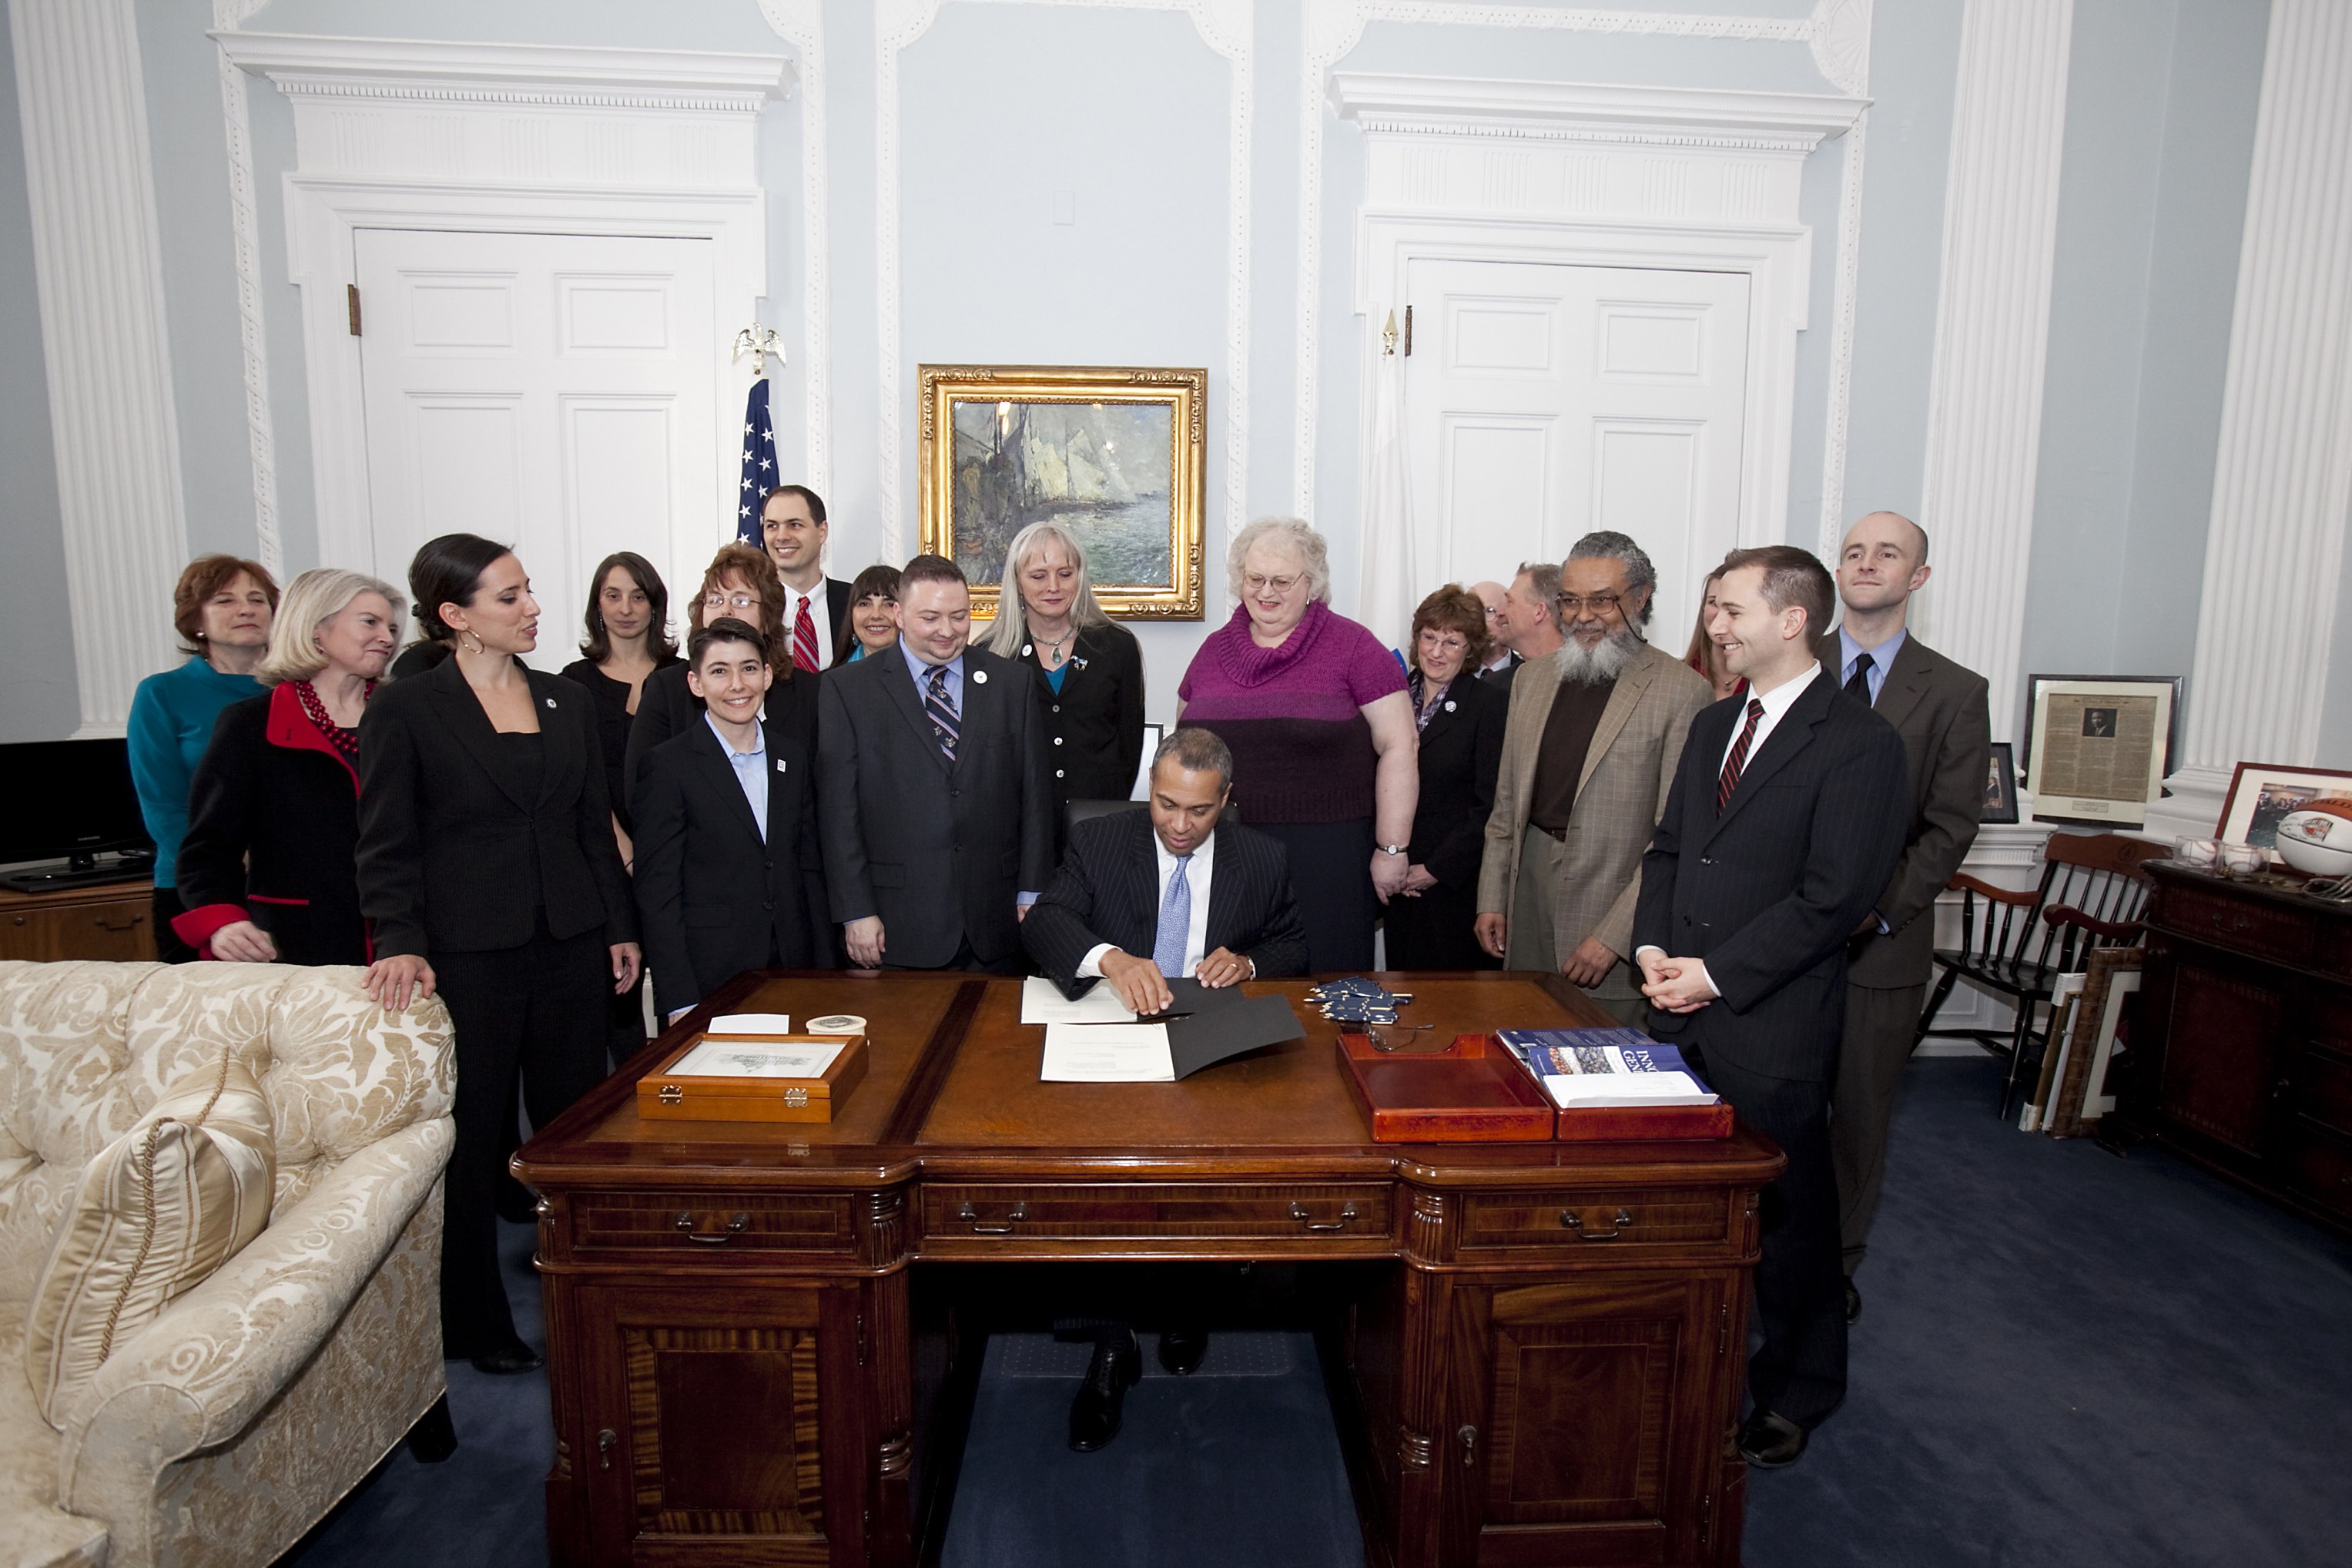 Gov Deval Patrick signs Executive Order surrounded by crowd of supporters, including MassEquality staff.